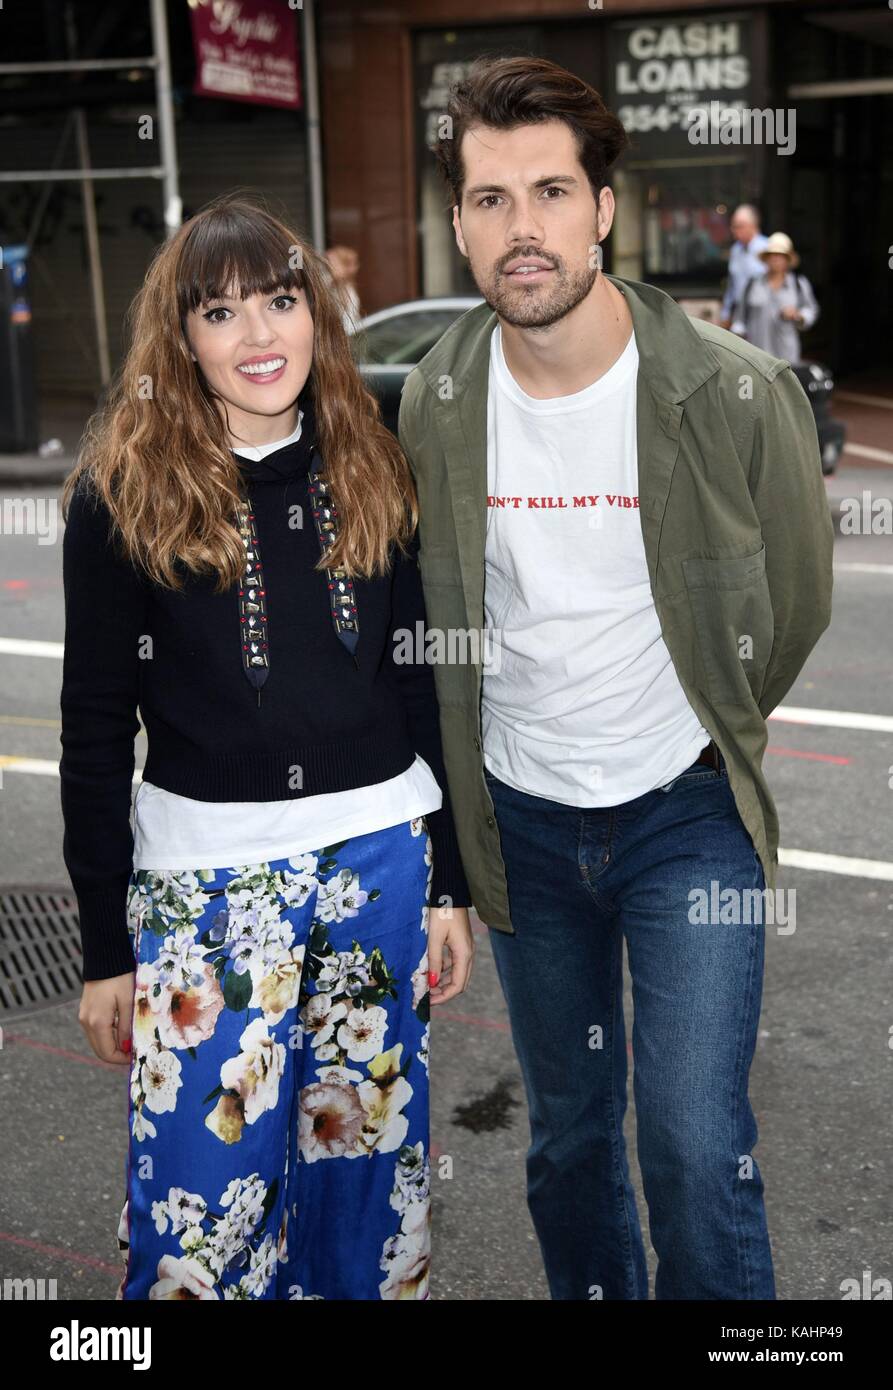 New York, NY, USA. 26th Sep, 2017. Oh Wonder, Josephine Vander Gucht, Anthony West out and about for Celebrity Candids - TUE, New York, NY September 26, 2017. Credit: Derek Storm/Everett Collection/Alamy Live News Stock Photo